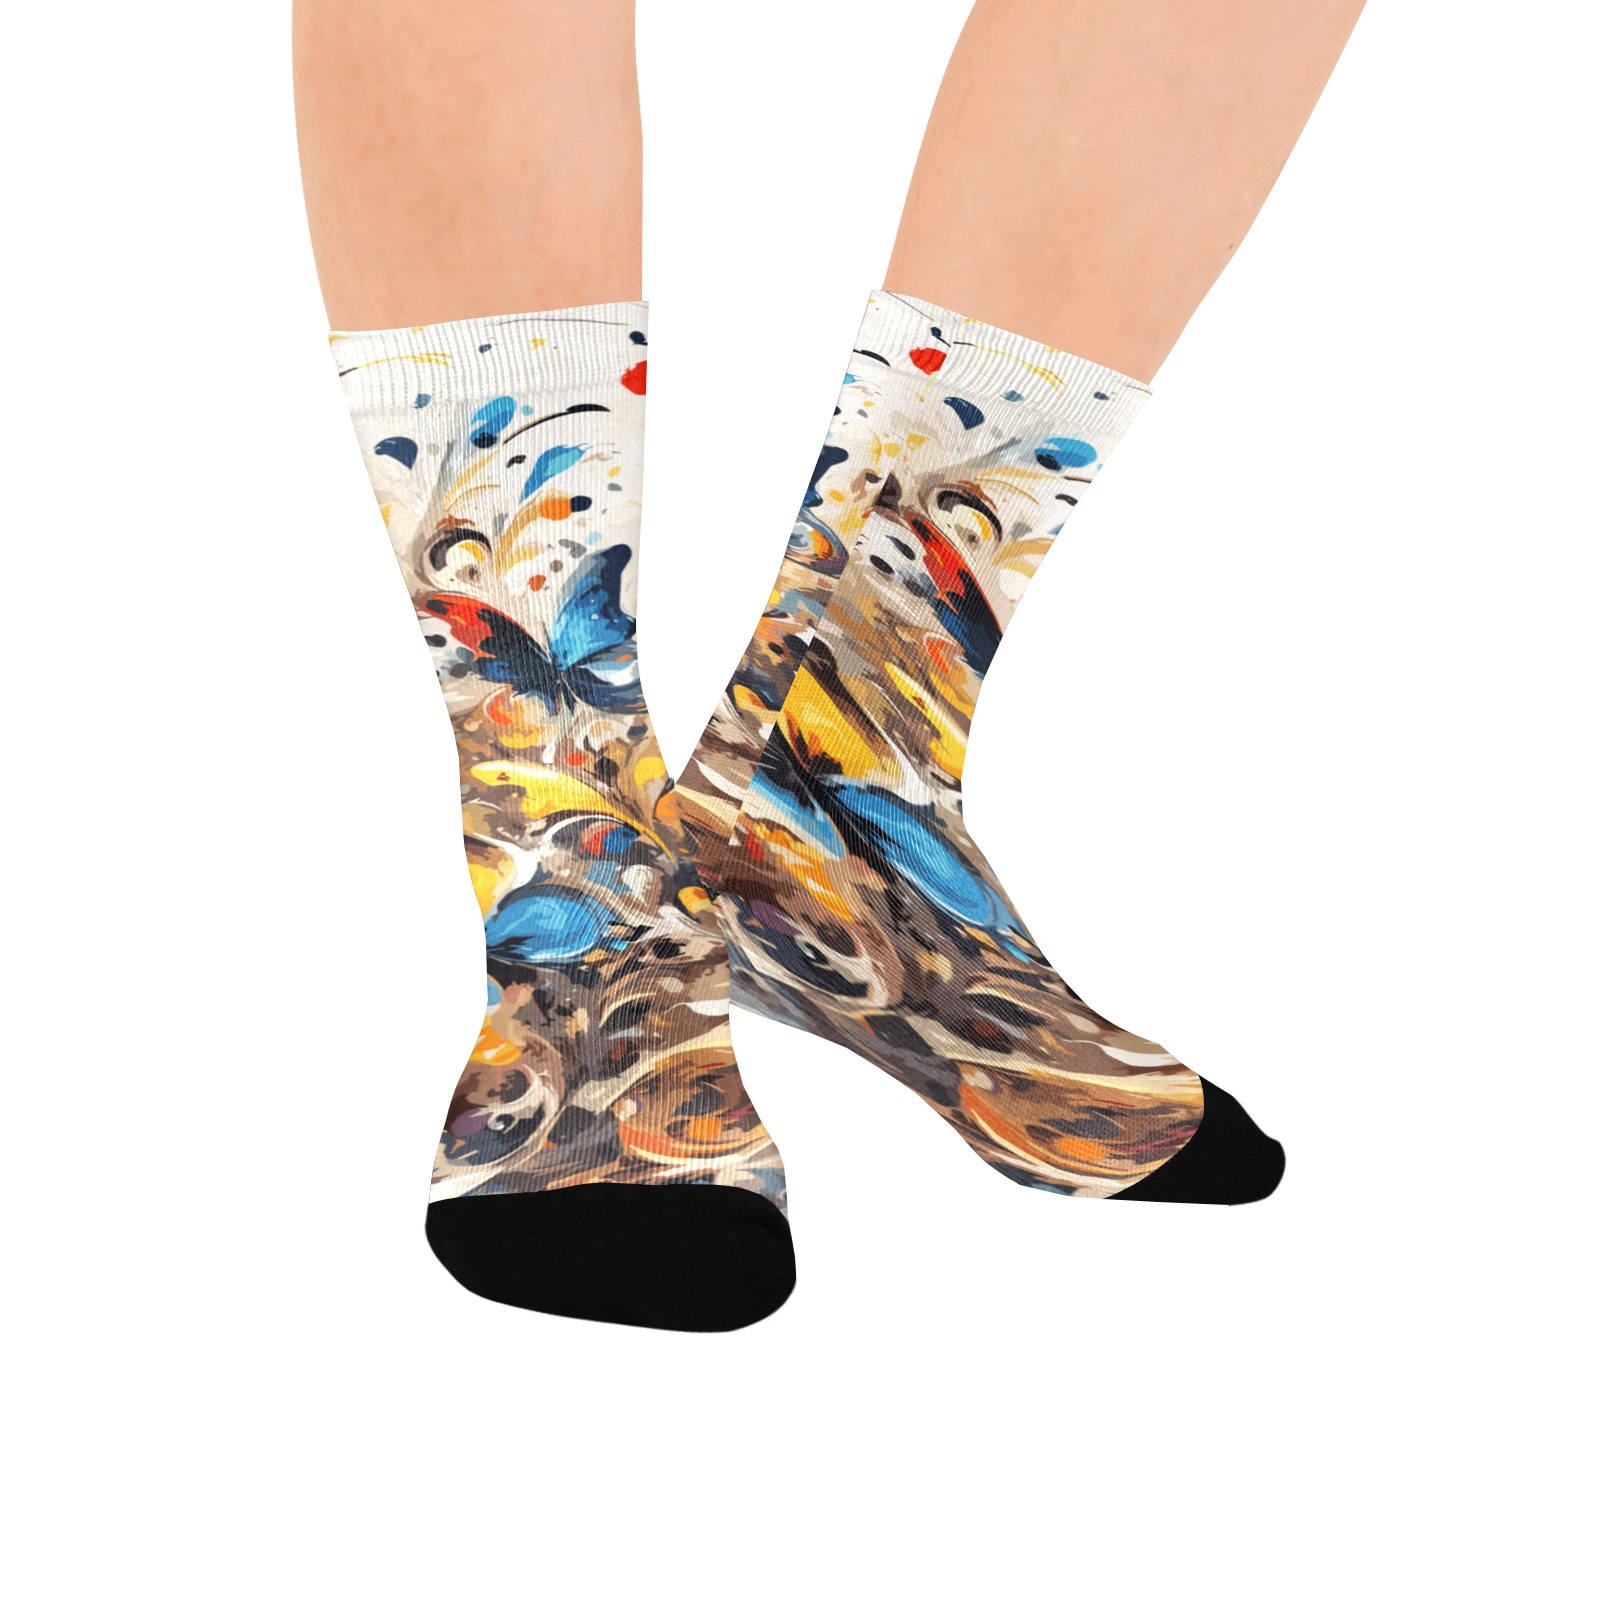 Colorful fantasy of blue and red butterflies Custom Socks for Women